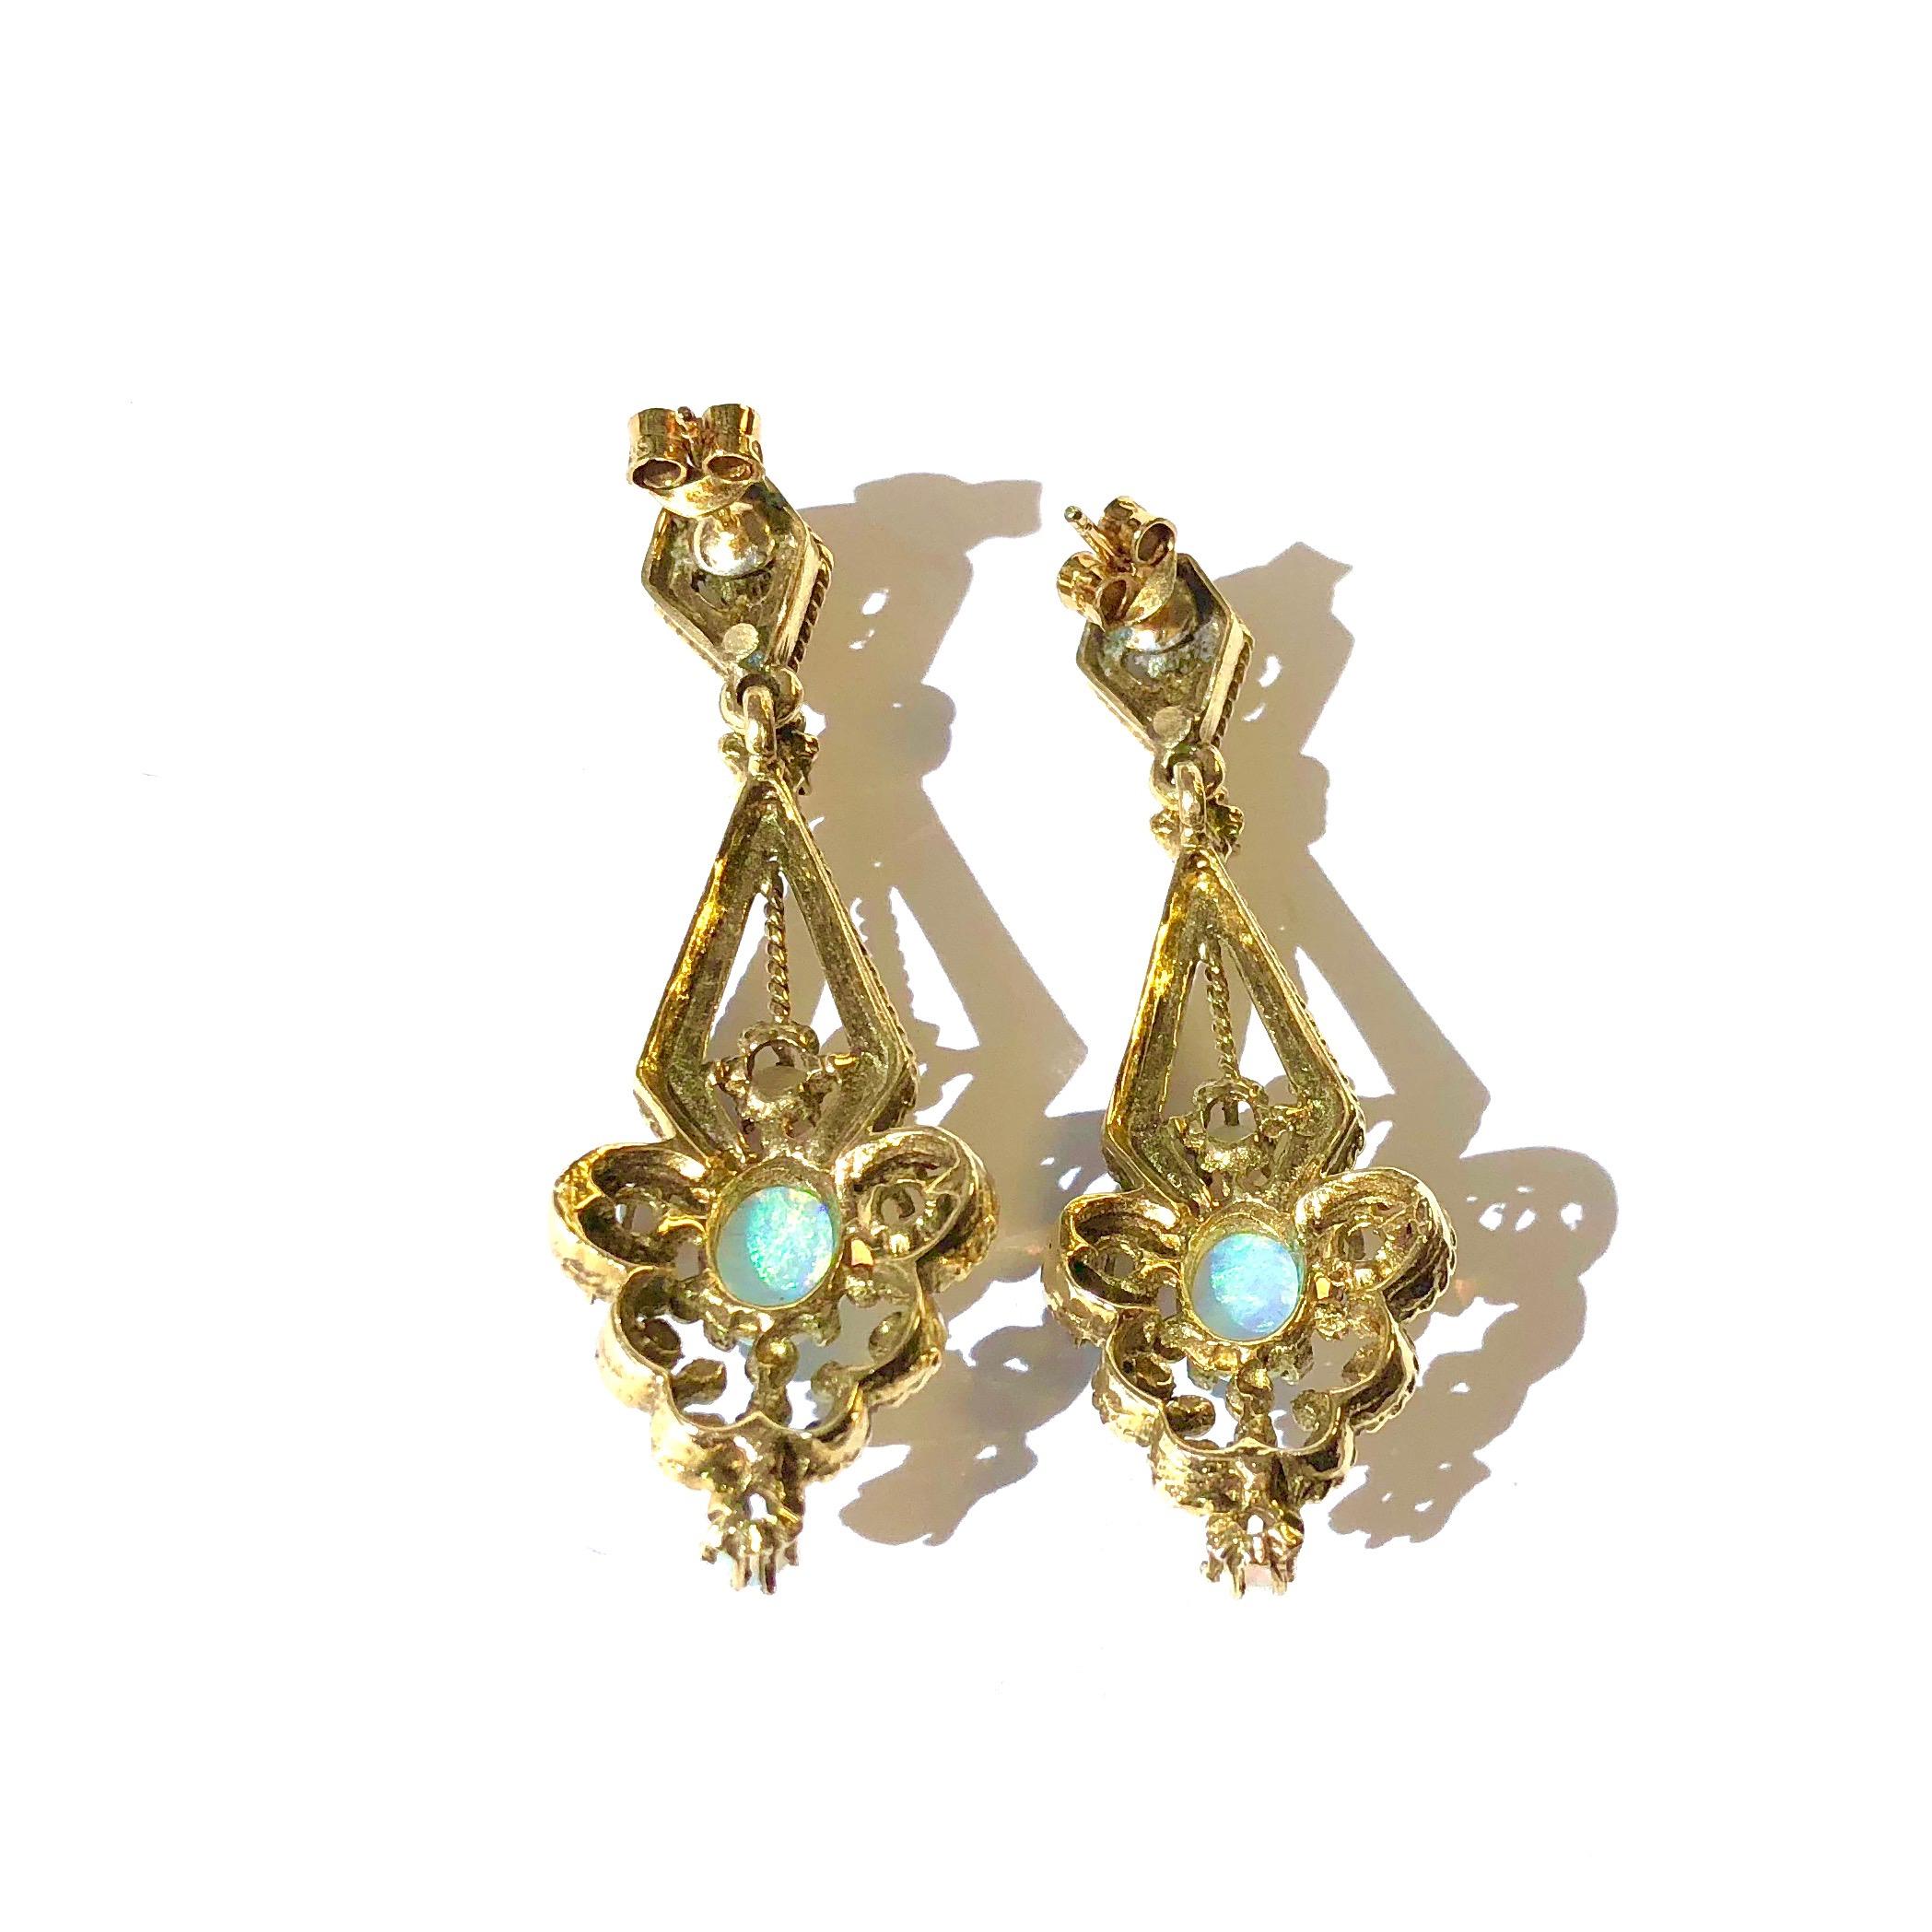 Crafted in 14K yellow gold, each earring features an elongated pendant set with seven round and oval opal cabochons. Approximate total opal weight: 2.20ct. The edges are decorated with small rope design. Post and butterfly backs. 
Measurements: 
1